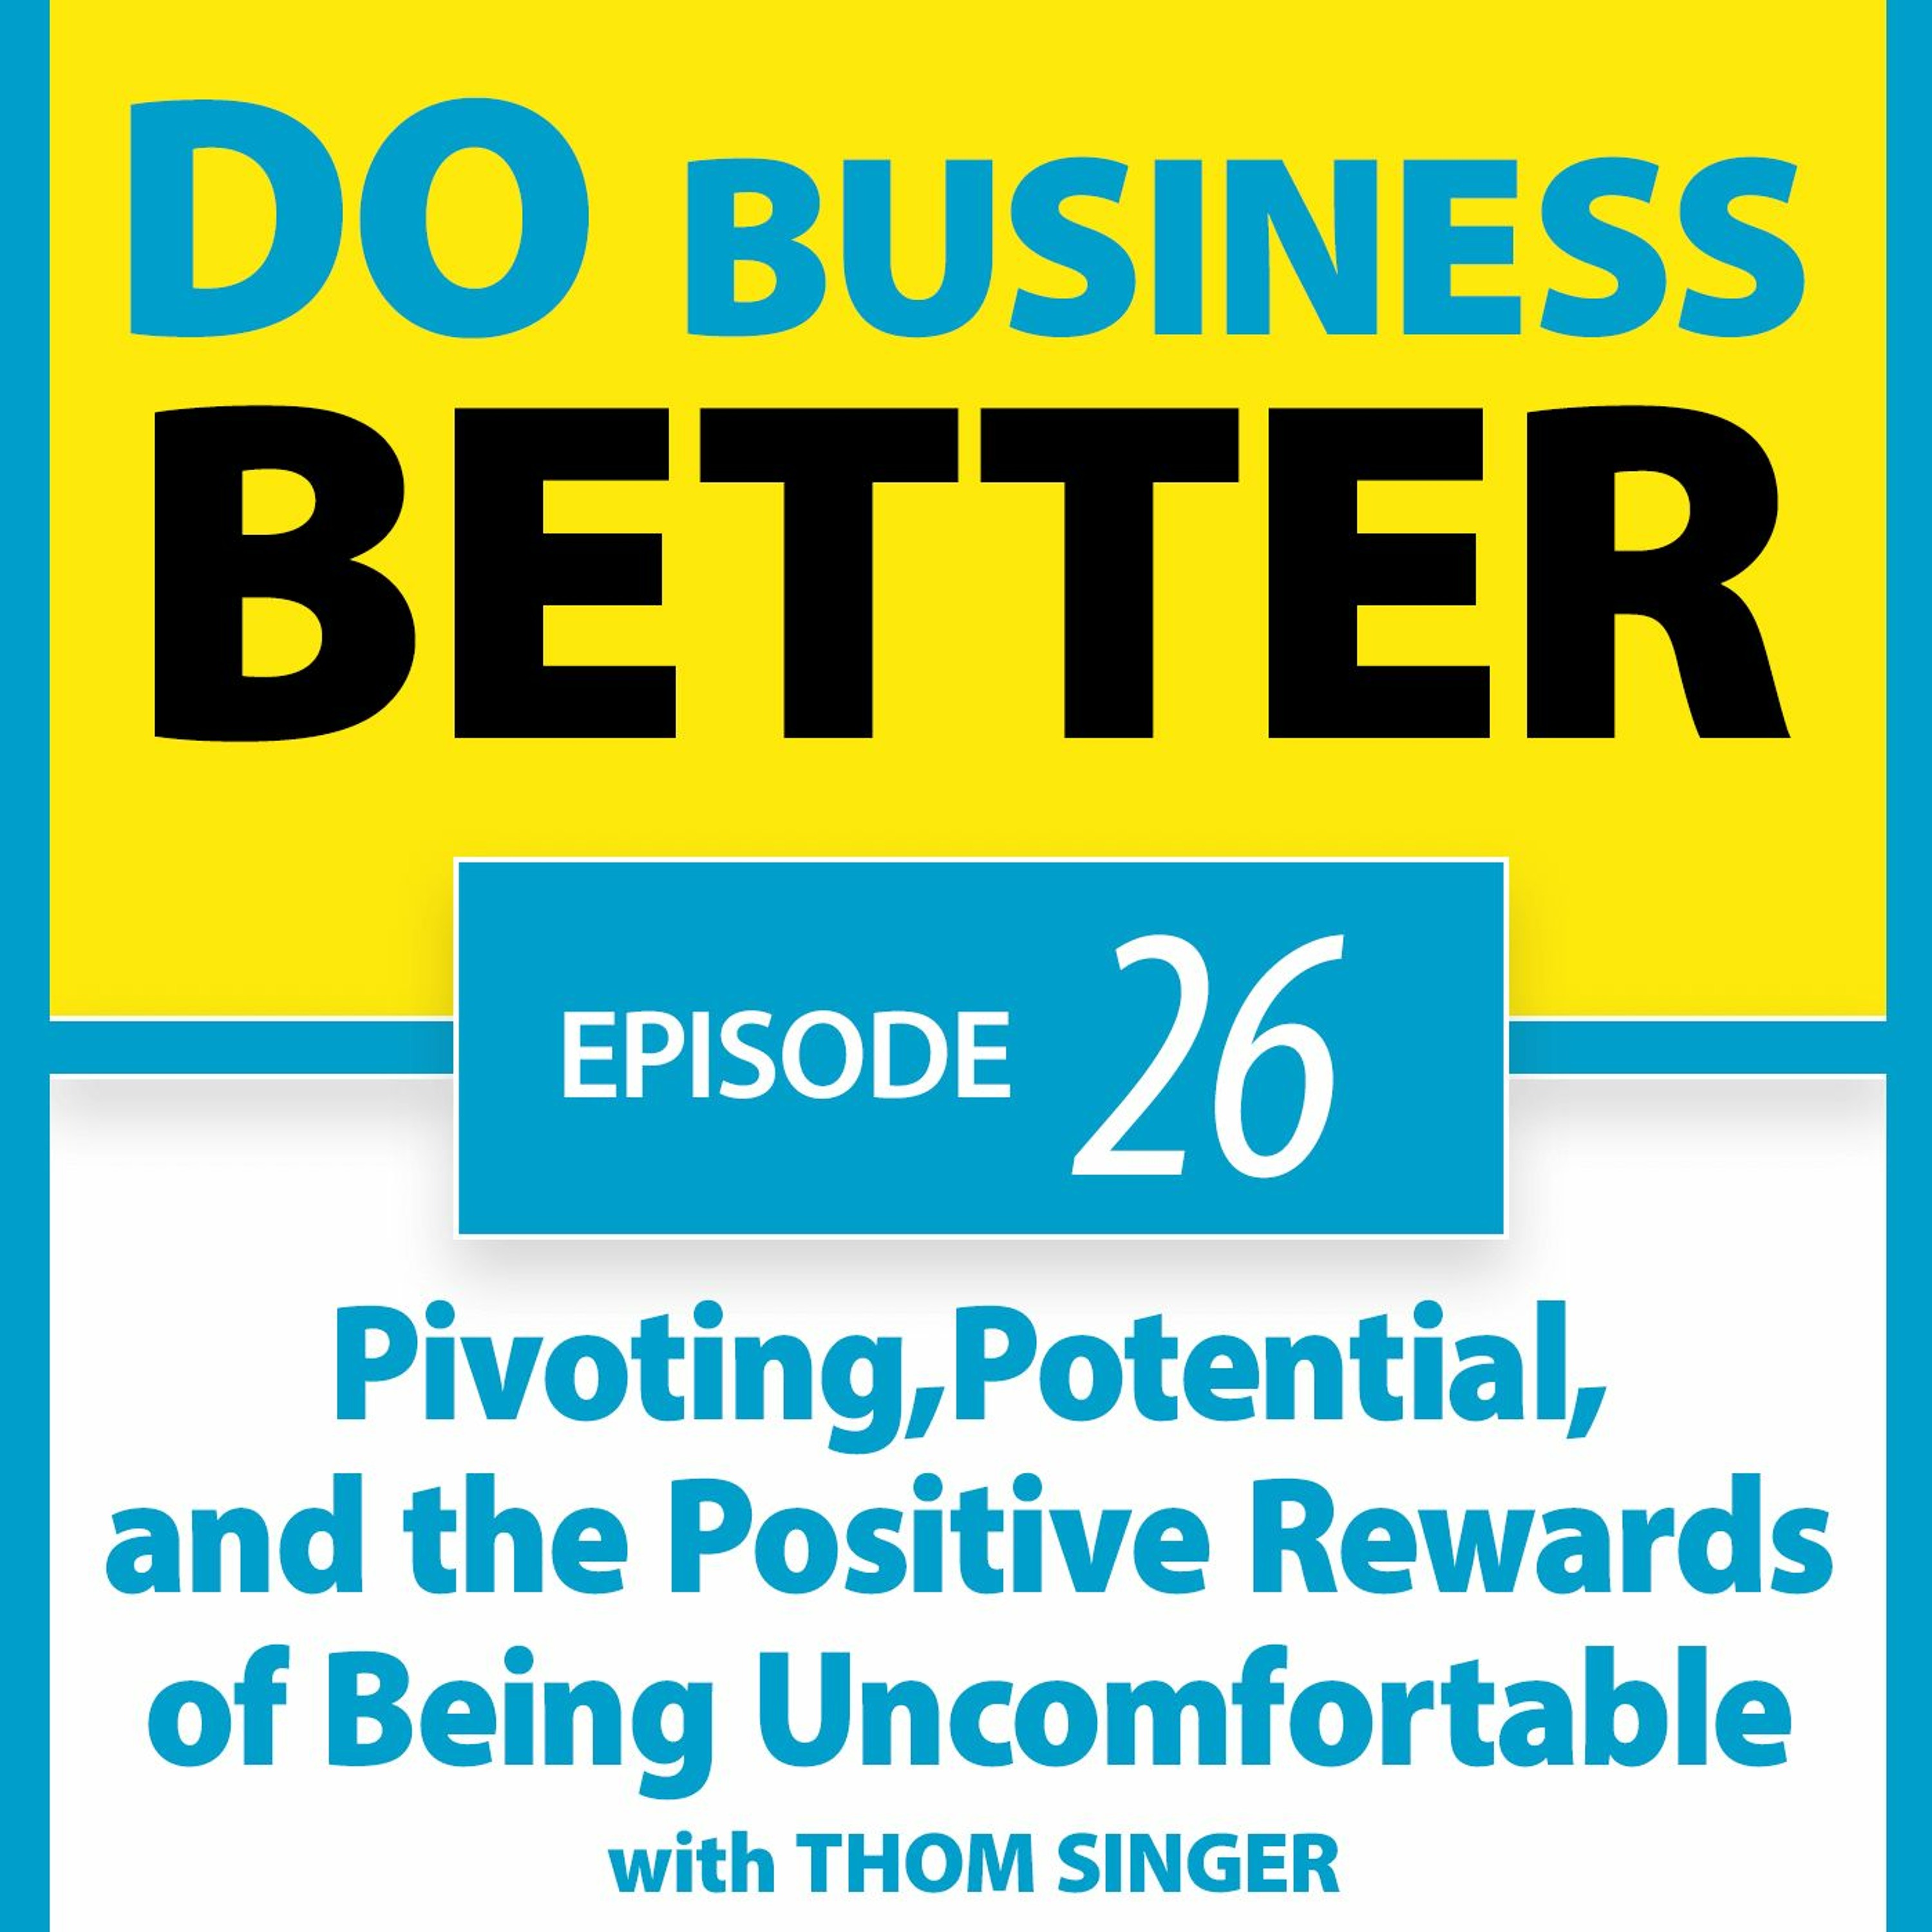 26 - Pivoting, Potential, and the Positive Rewards of Being Uncomfortable - with Thom Singer